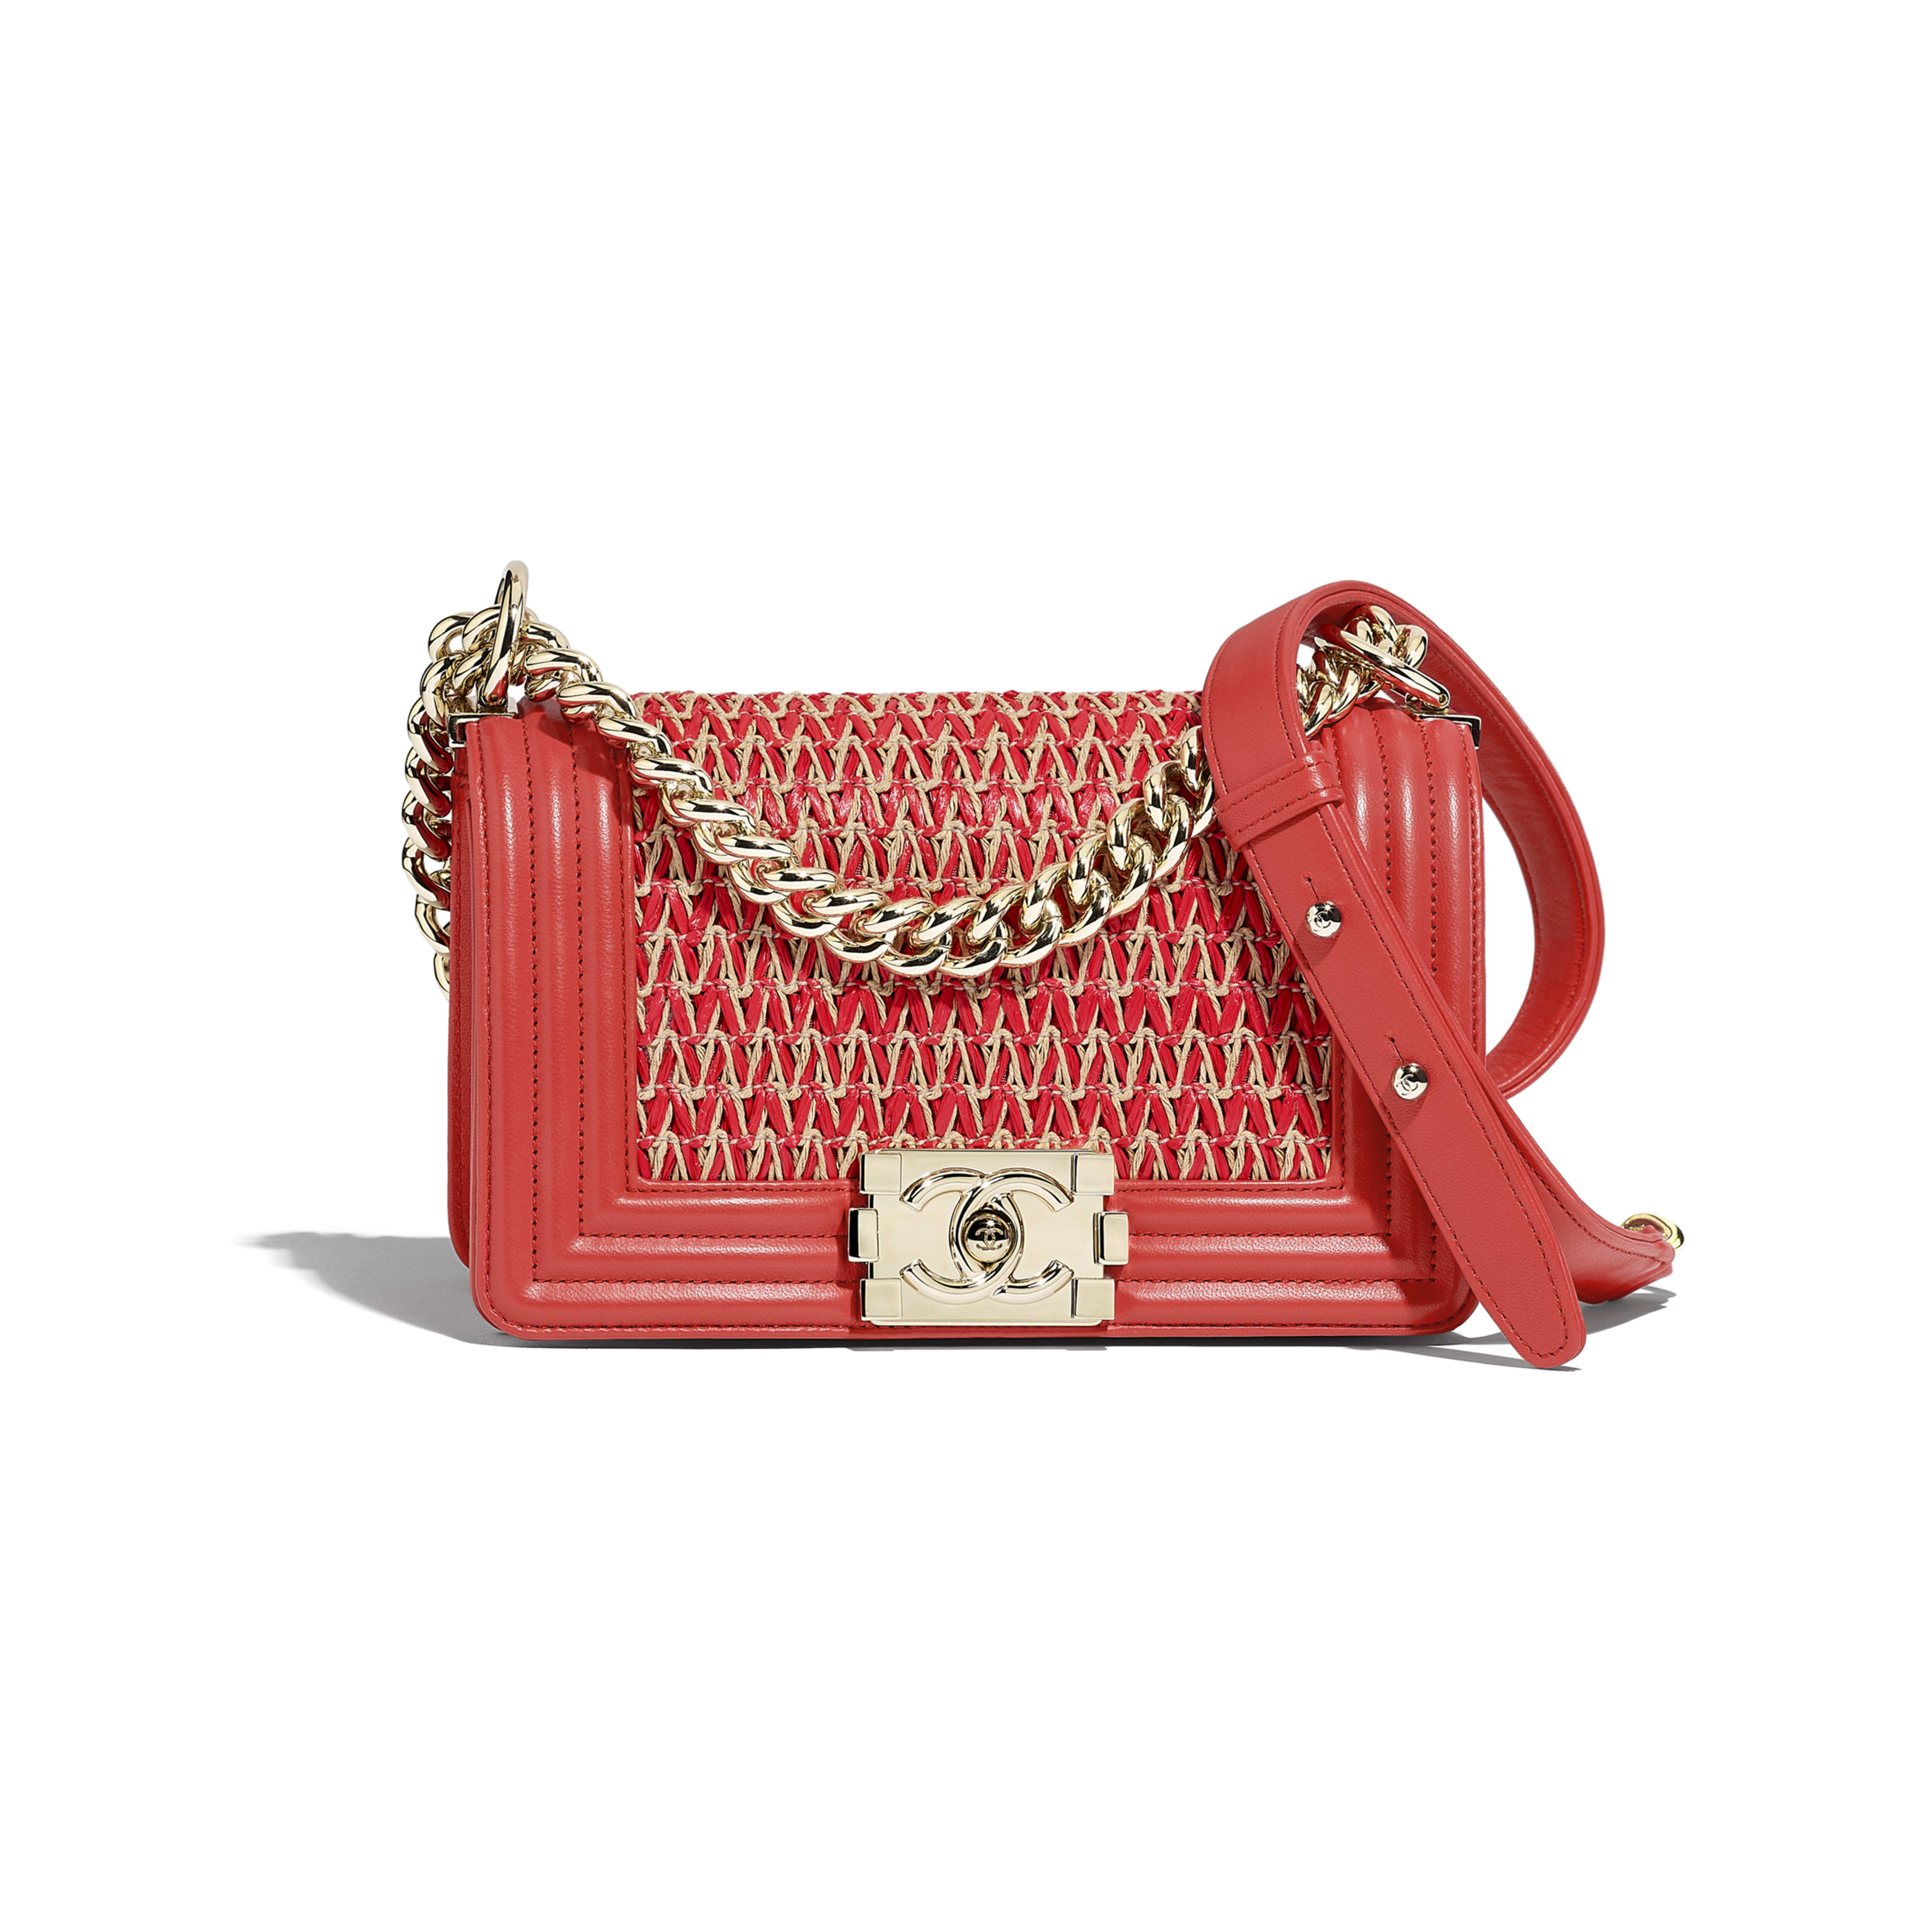 chanel small boy bag in coral red